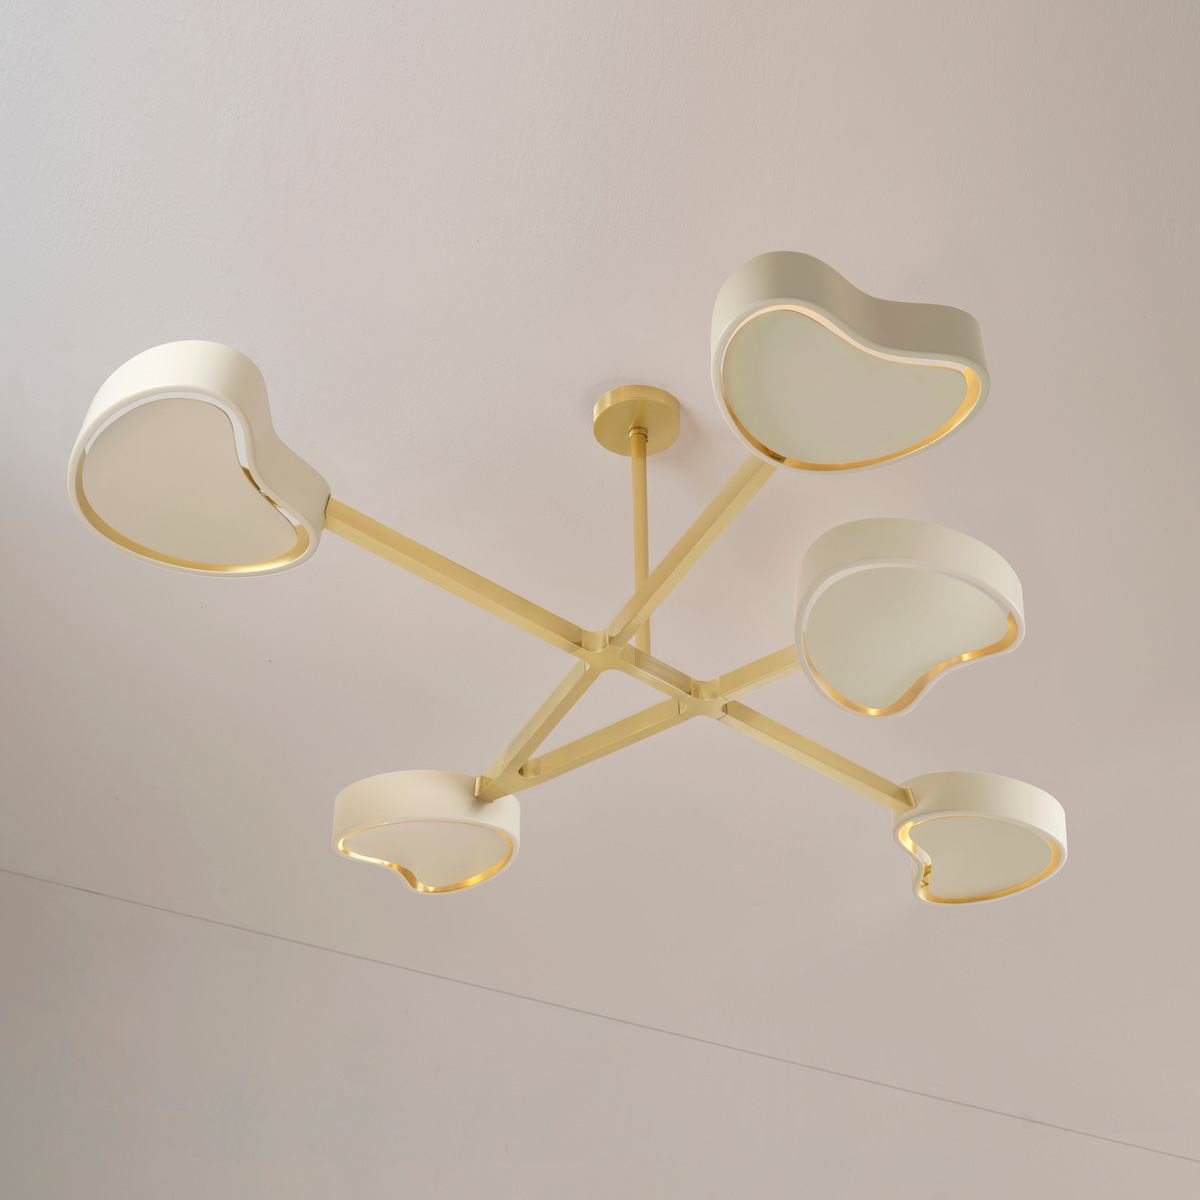 cuore N5 ceiling light by gaspare asaro